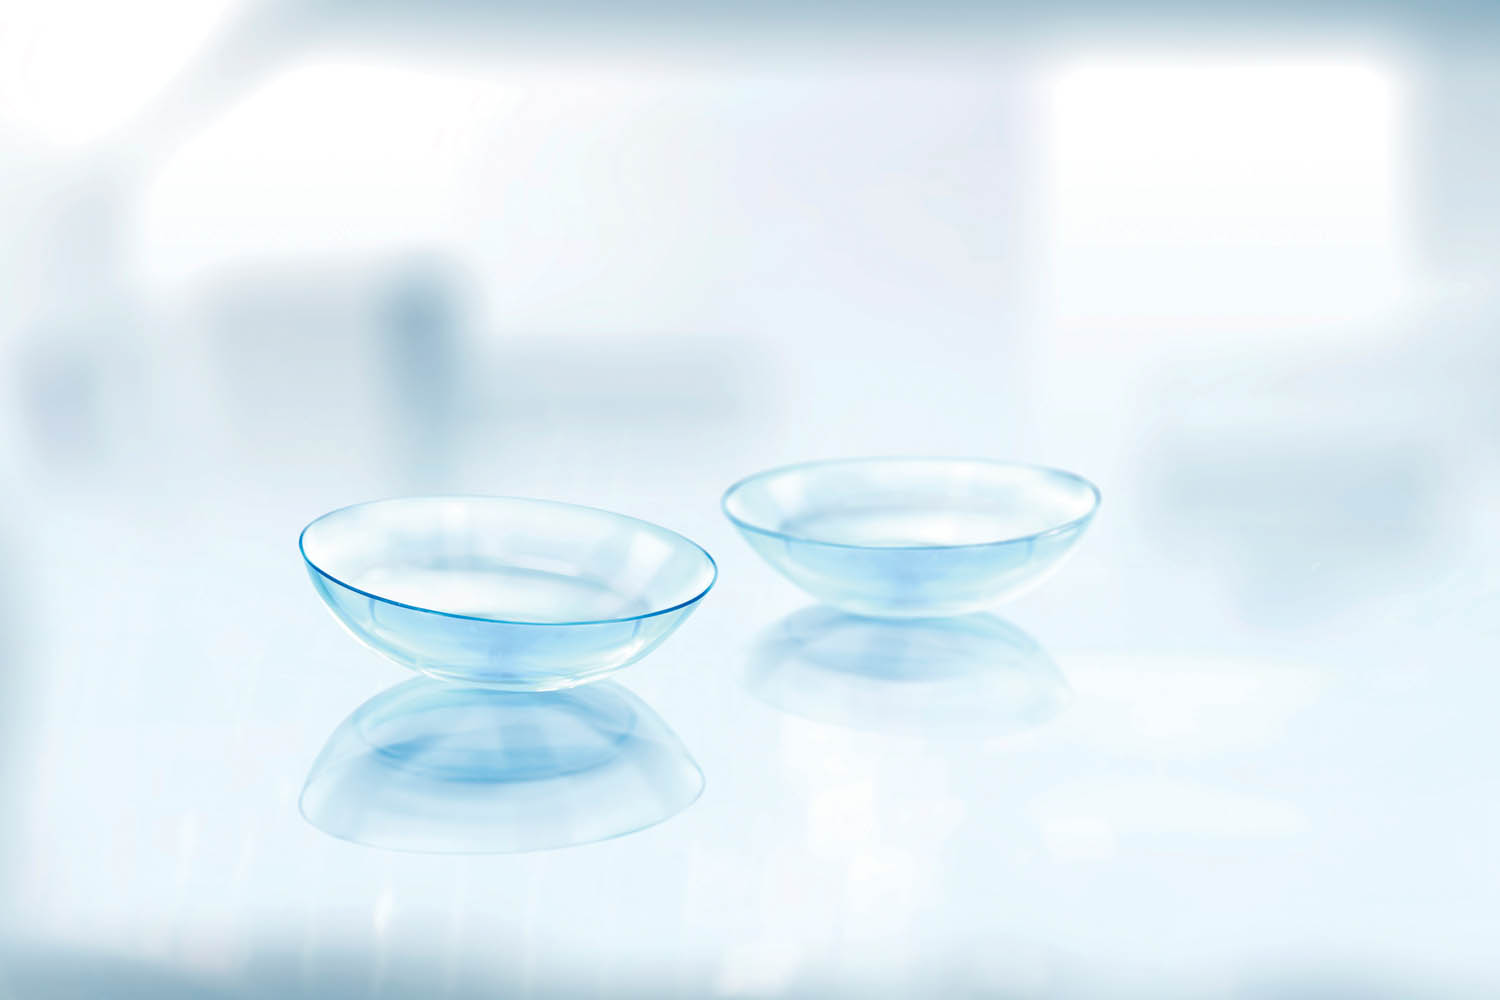 Glasses to contact lenses